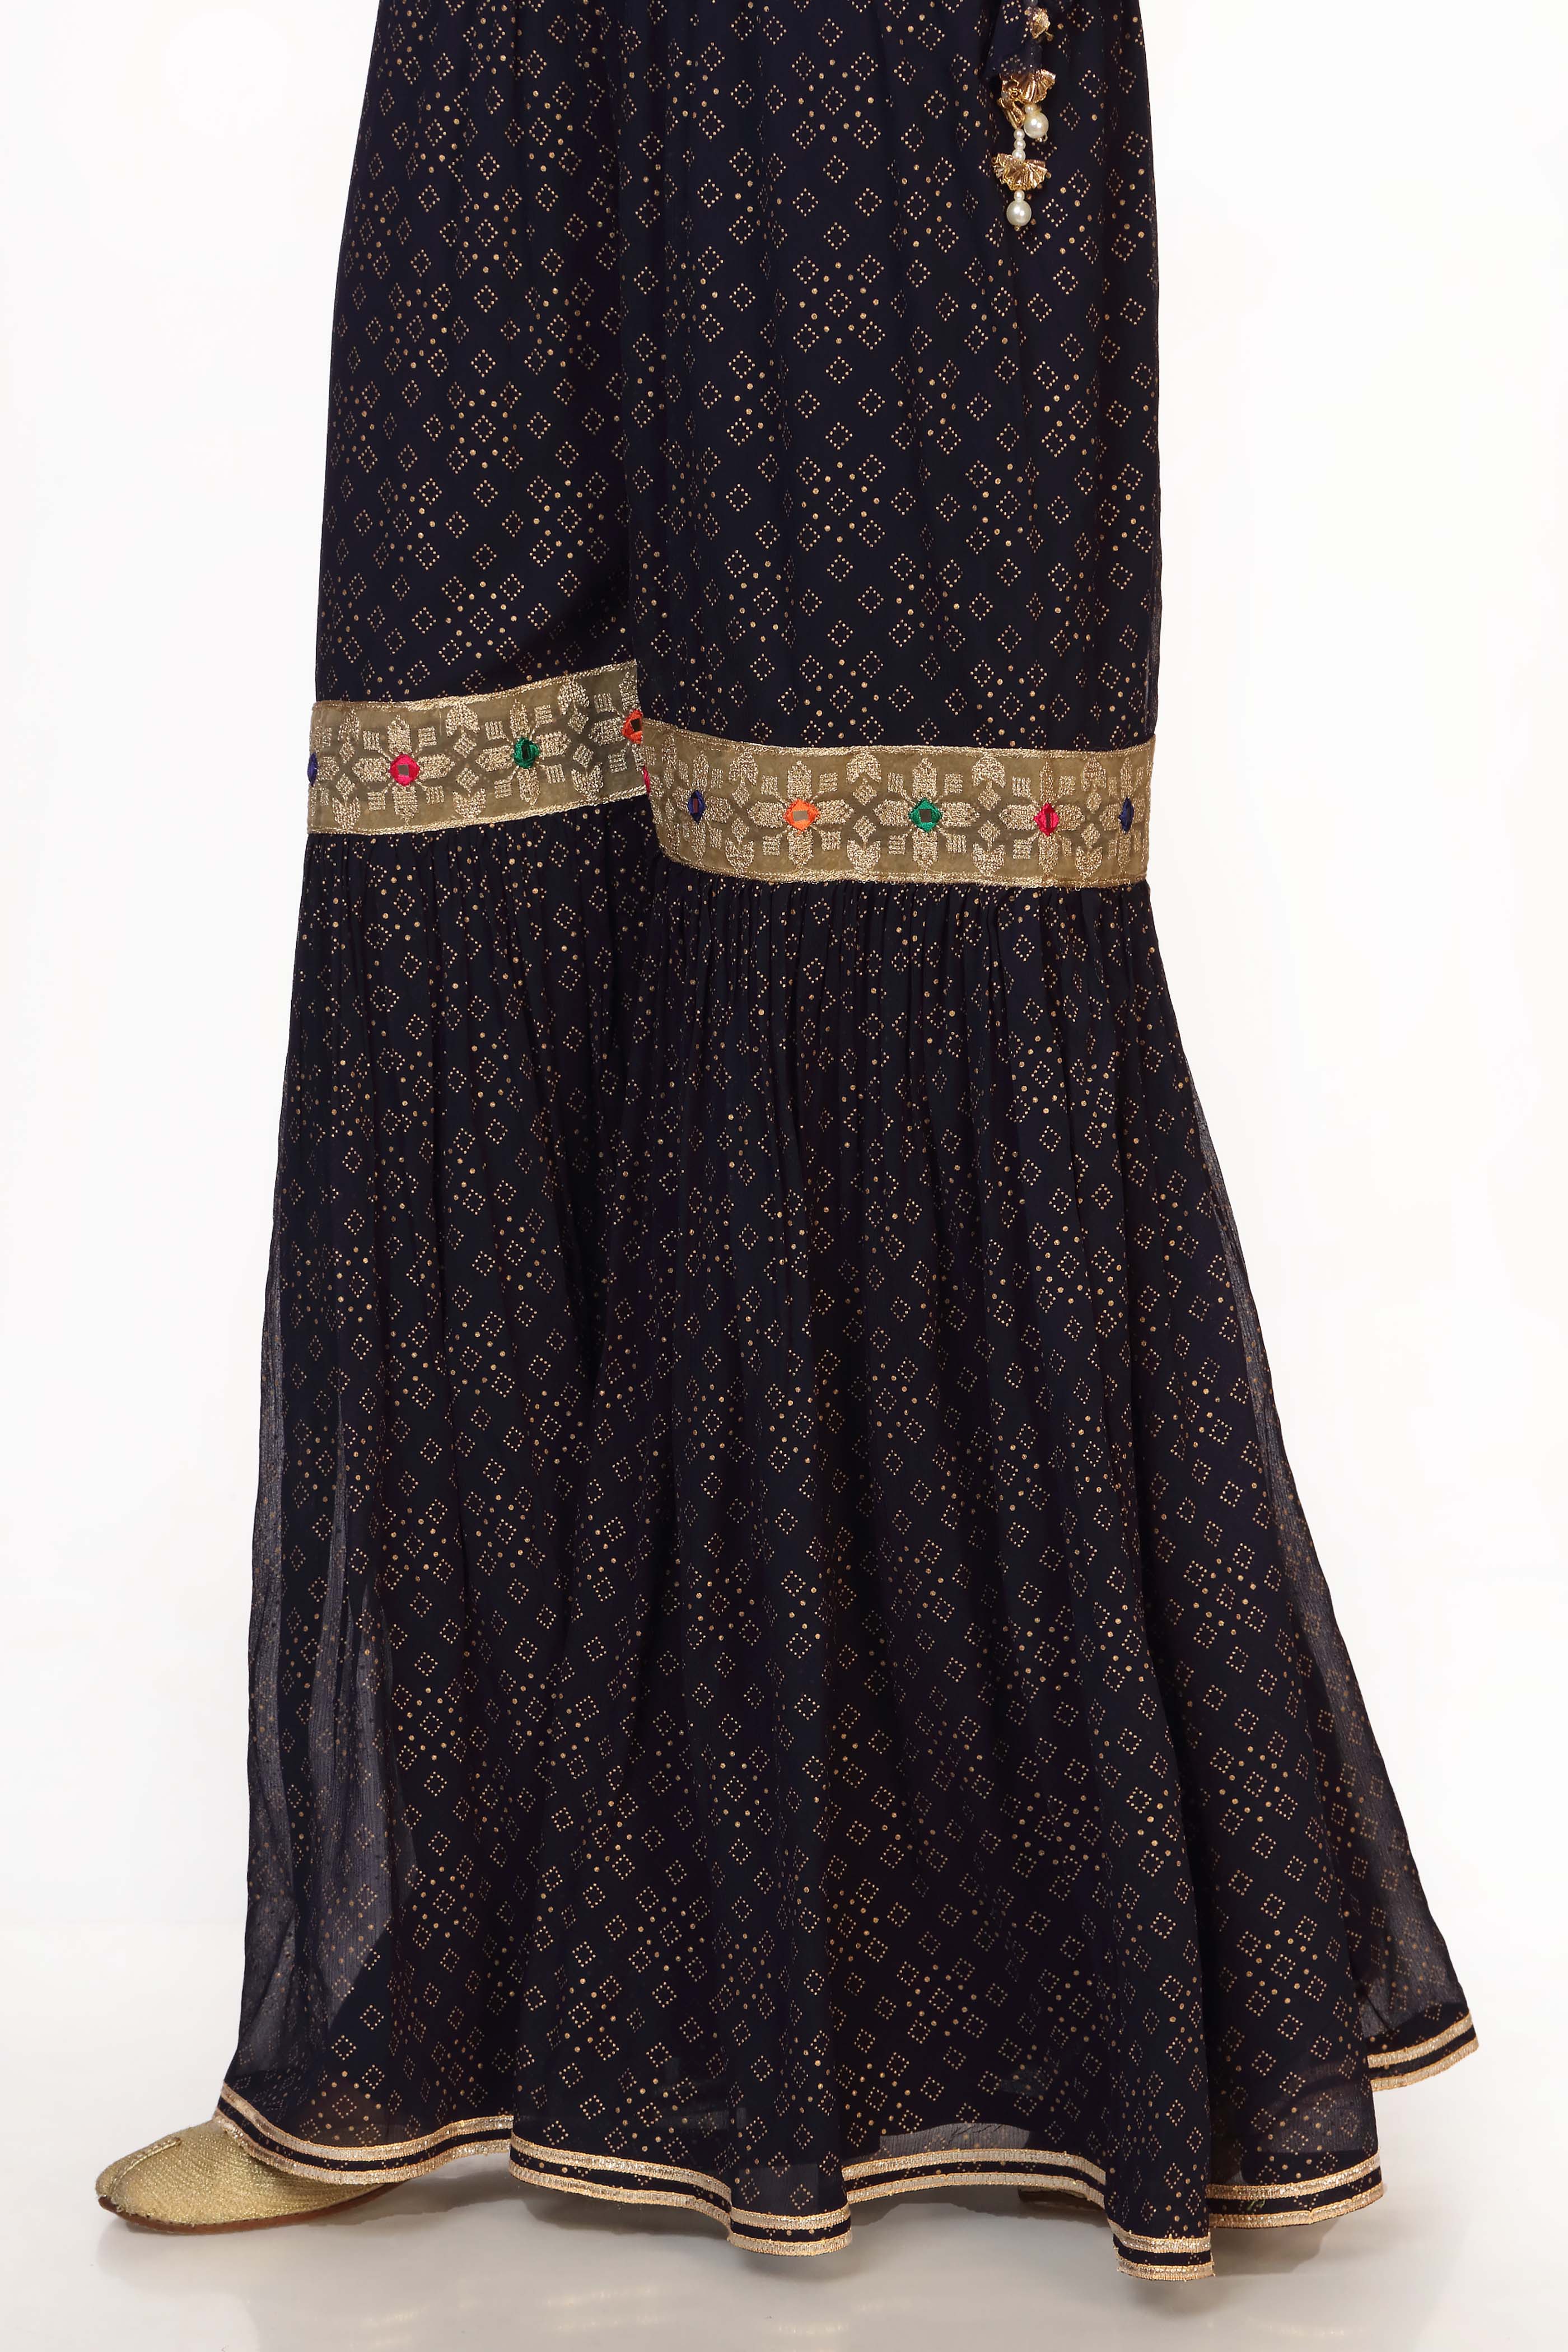 Blue Tilla 4 in Navy Blue coloured Printed Lawn fabric 2